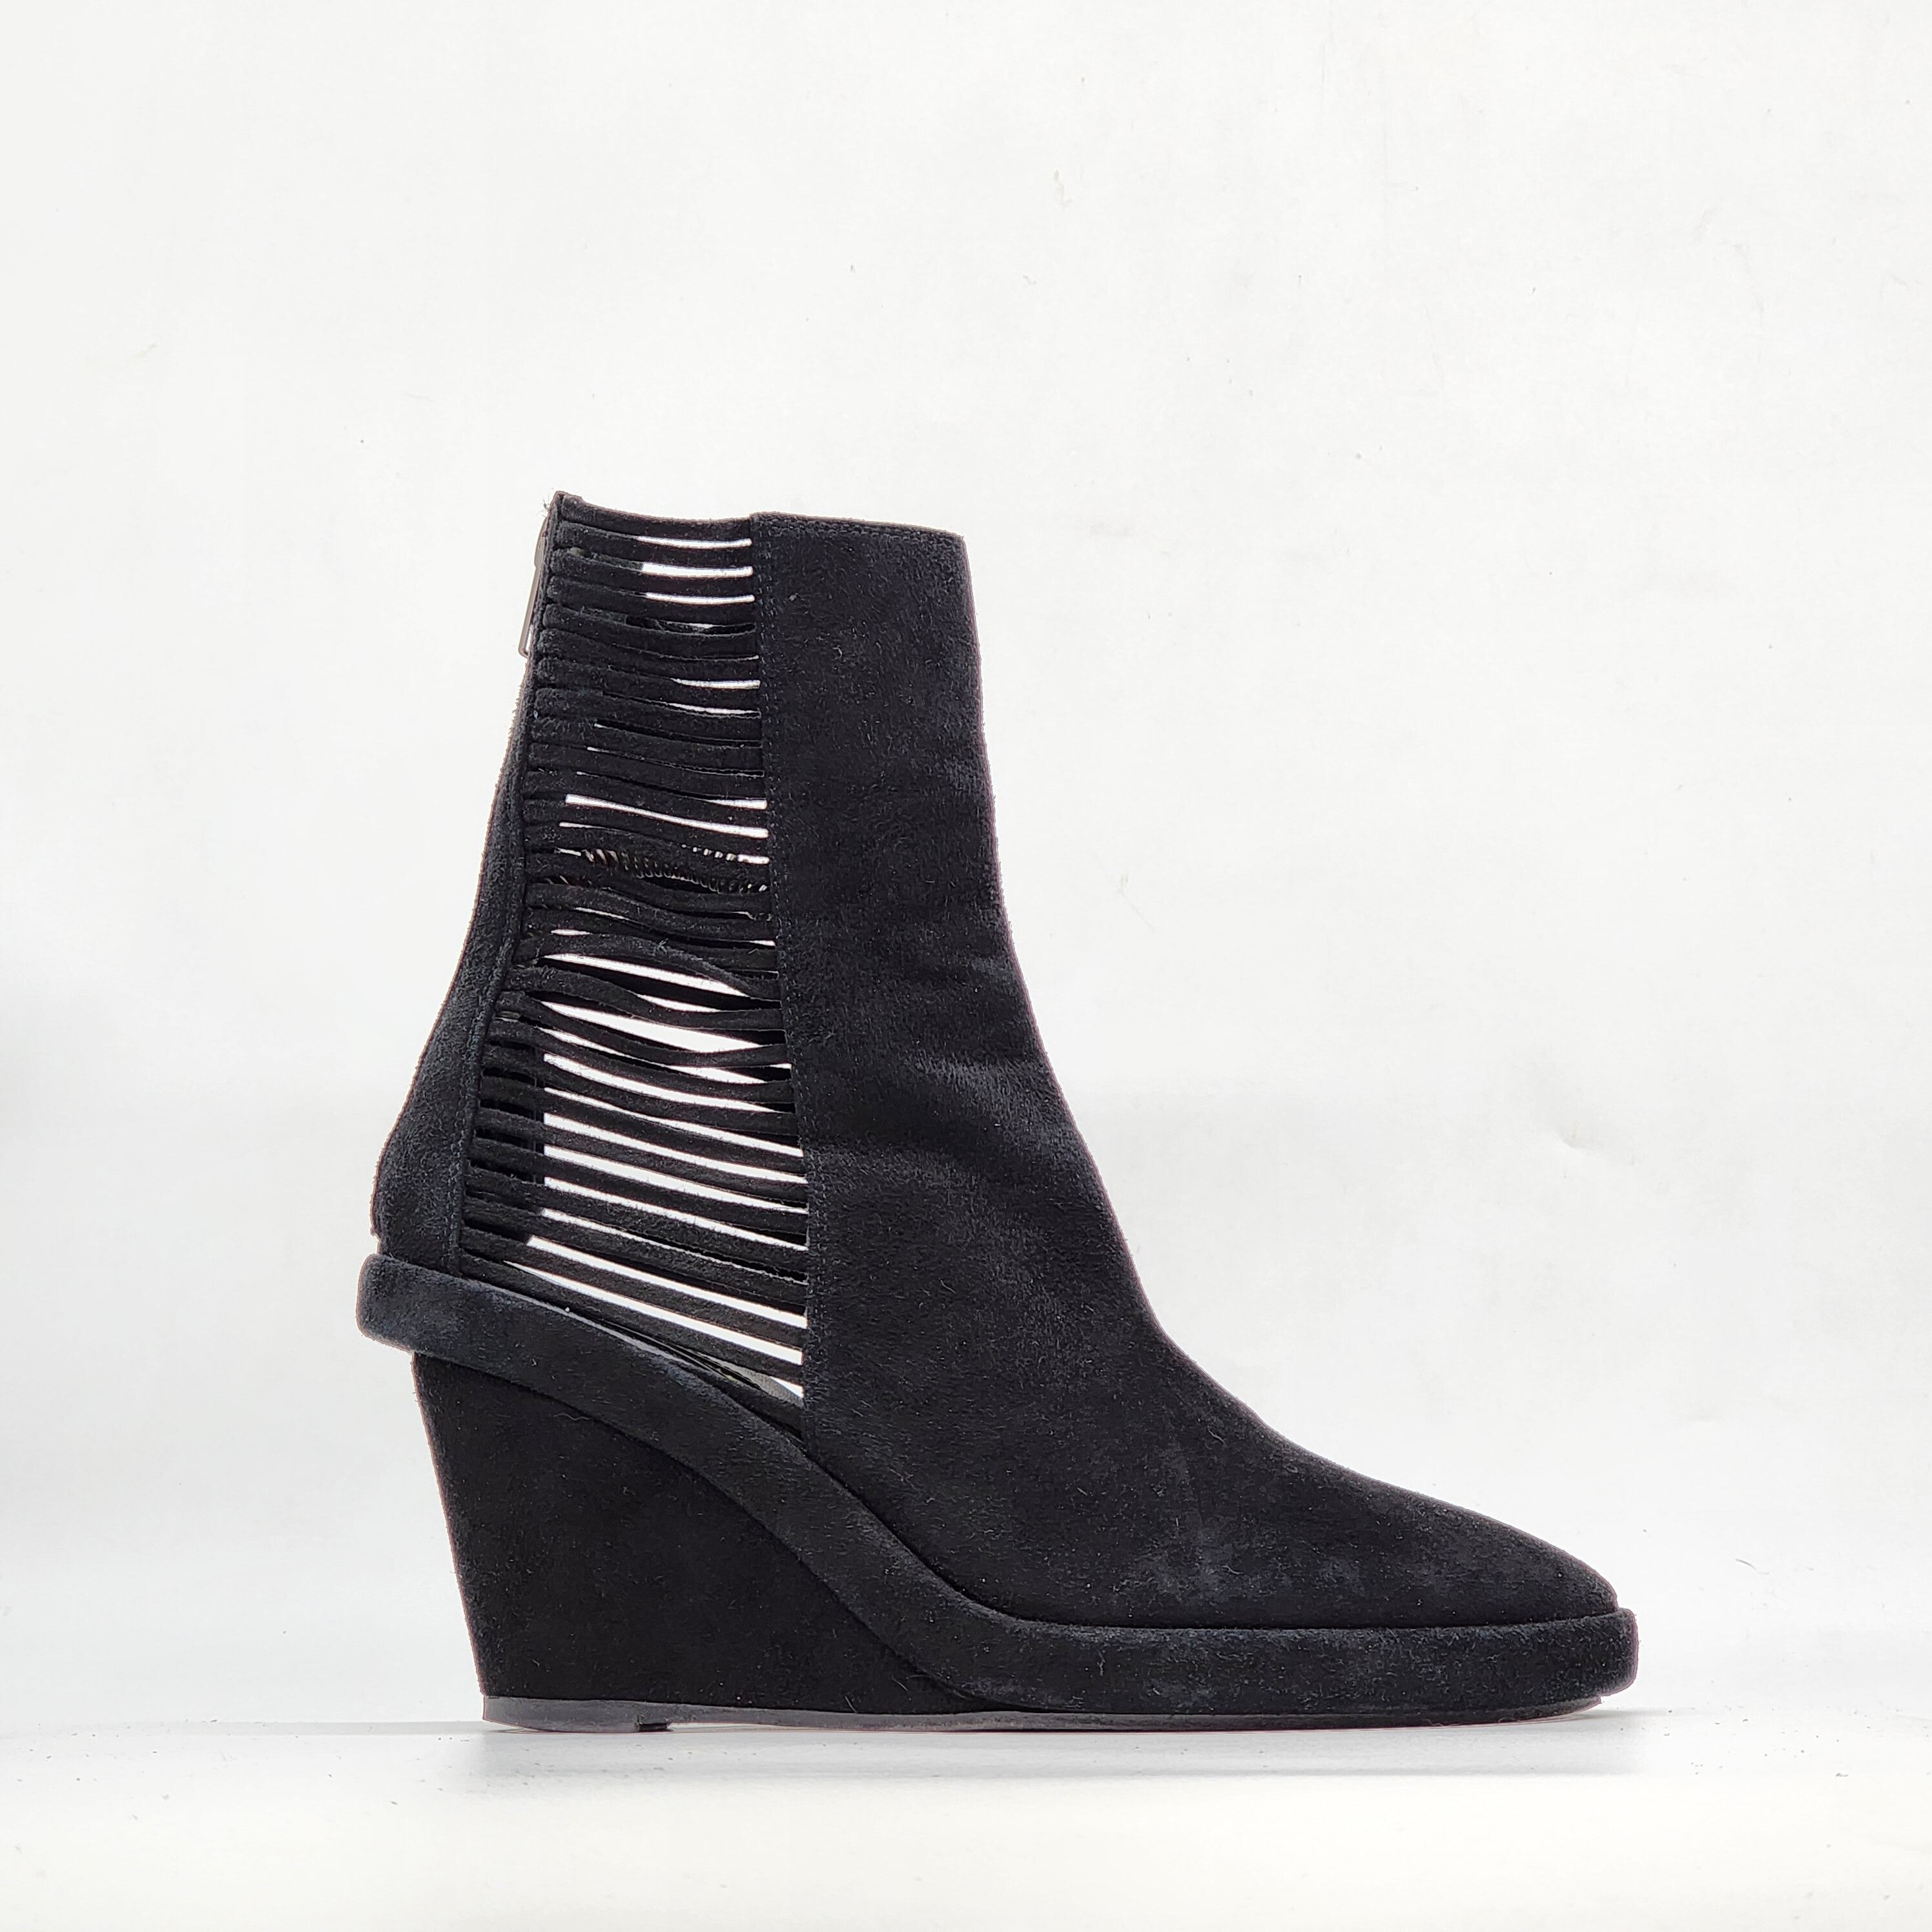 Ann Demeulemeester - Black Suede Slatted Wedge Boots - 1